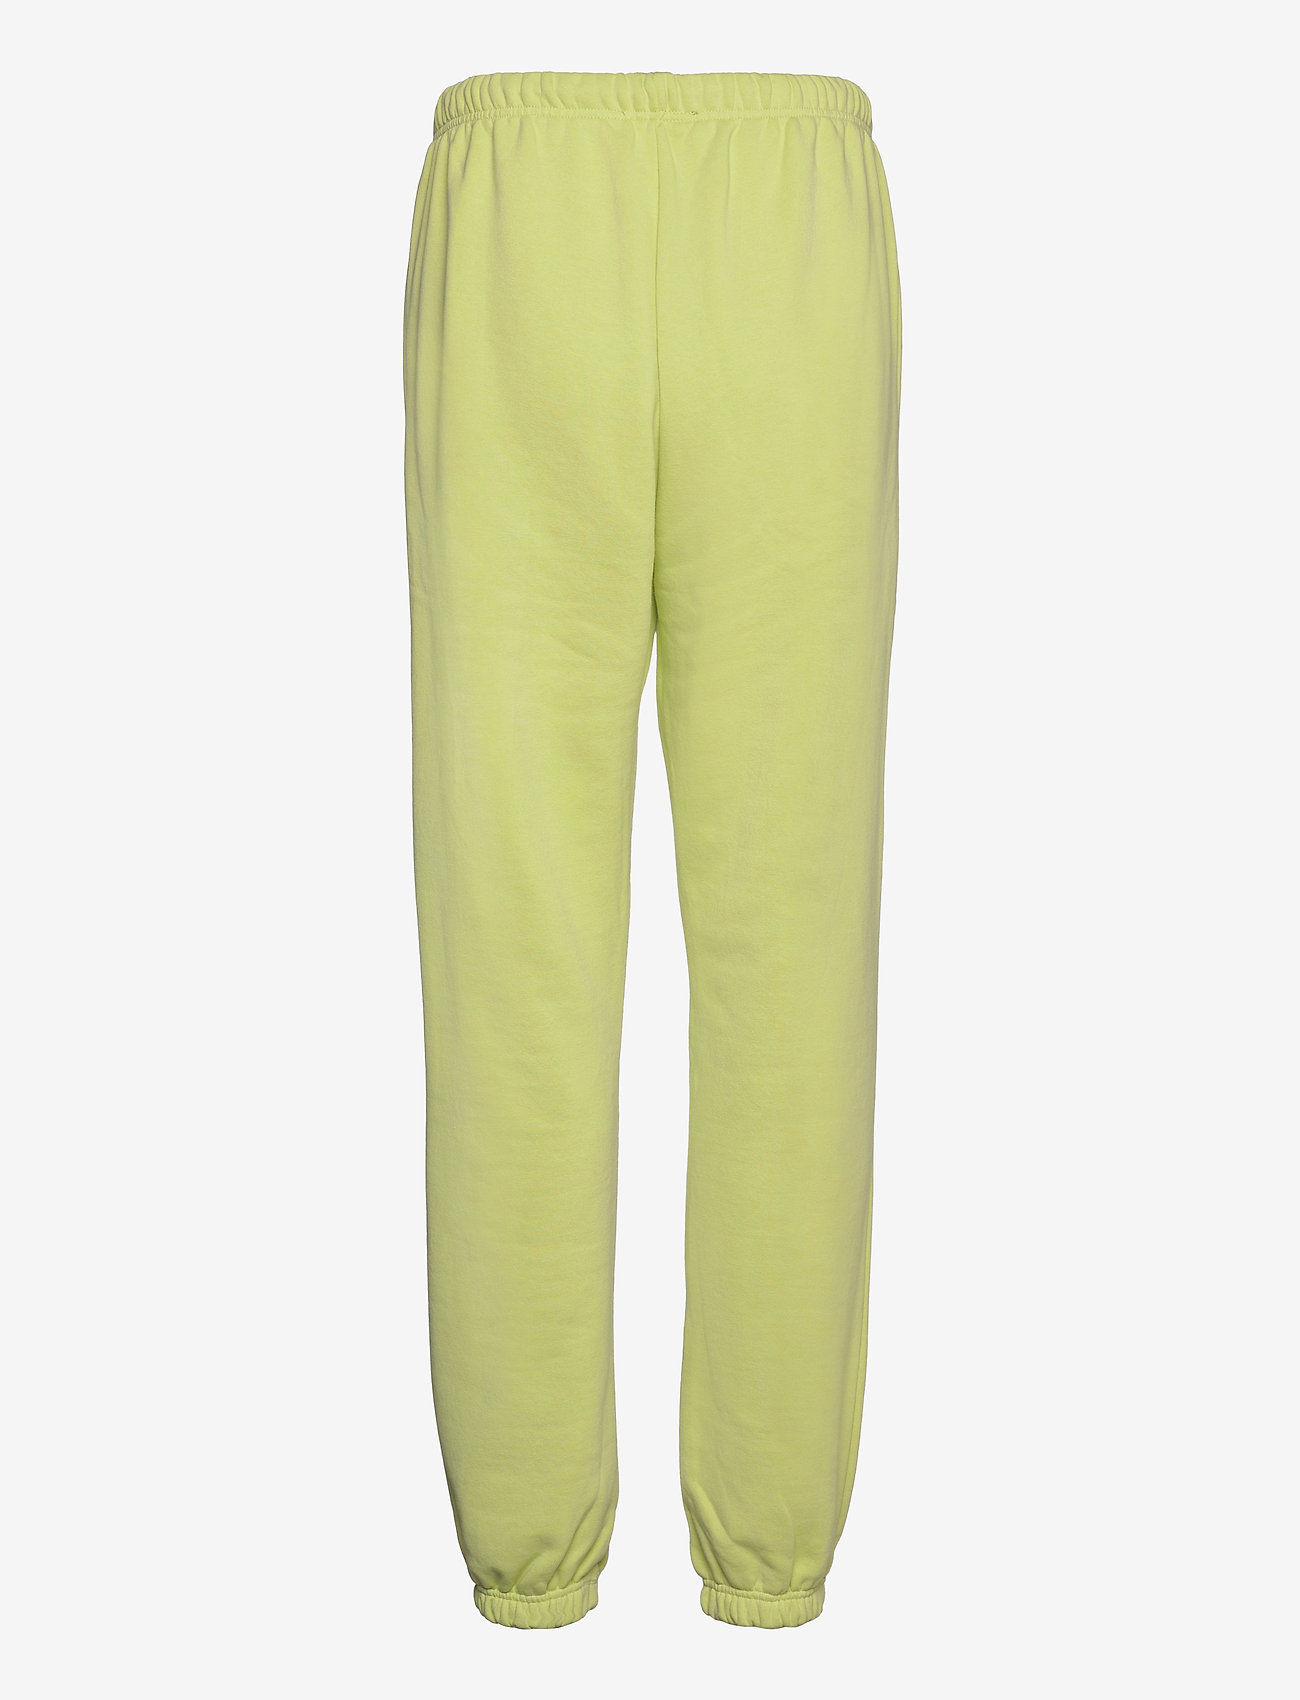 OW Collection - OW Sweatpants - women - green - 1